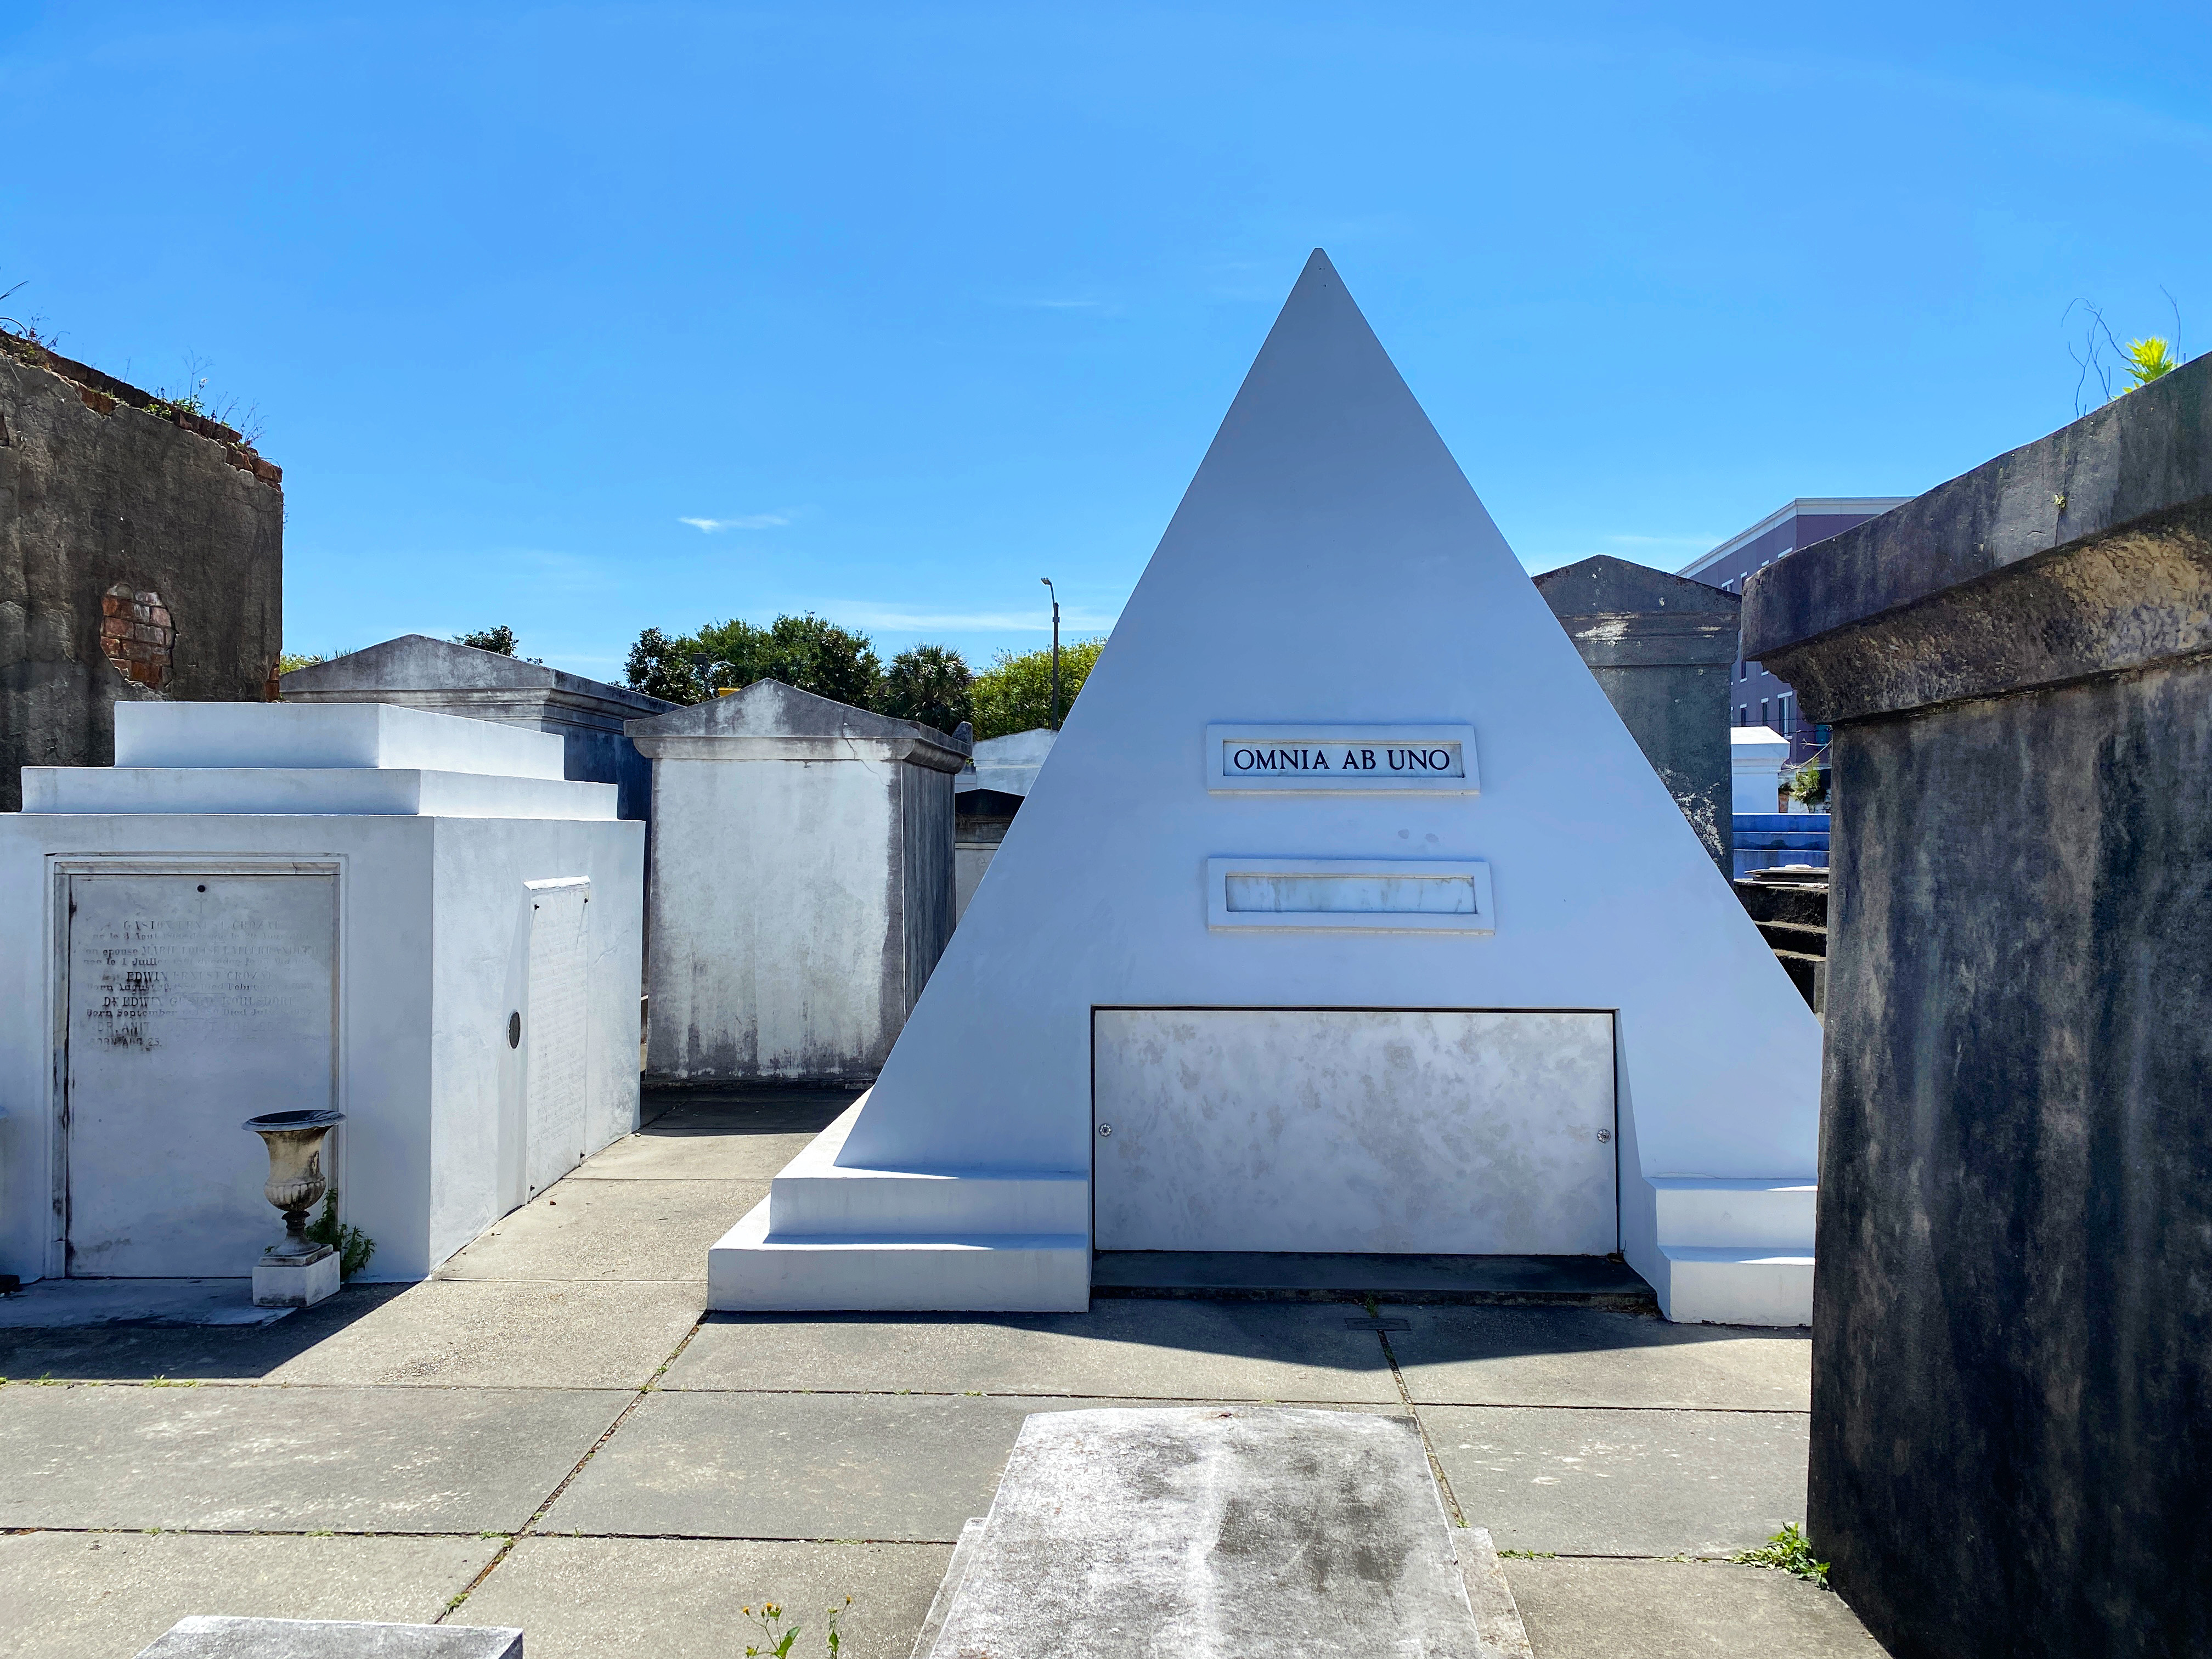 A white, pyramid-shaped tomb in among other tombs in a cemetery, inscription on it reads: “Omnia ab uno”